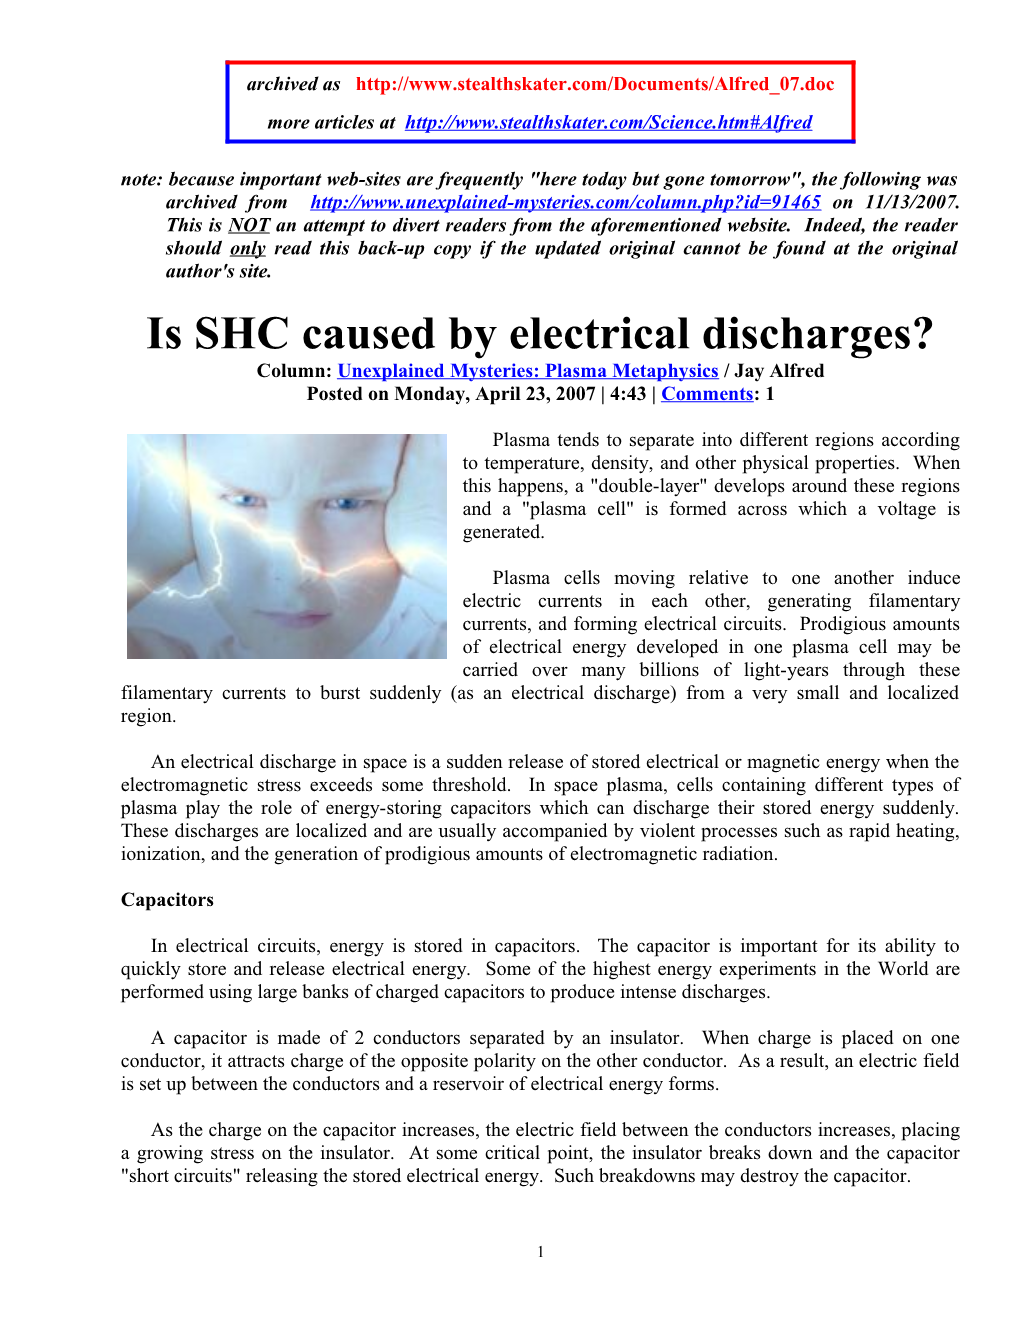 Is SHC Caused by Electrical Discharges?